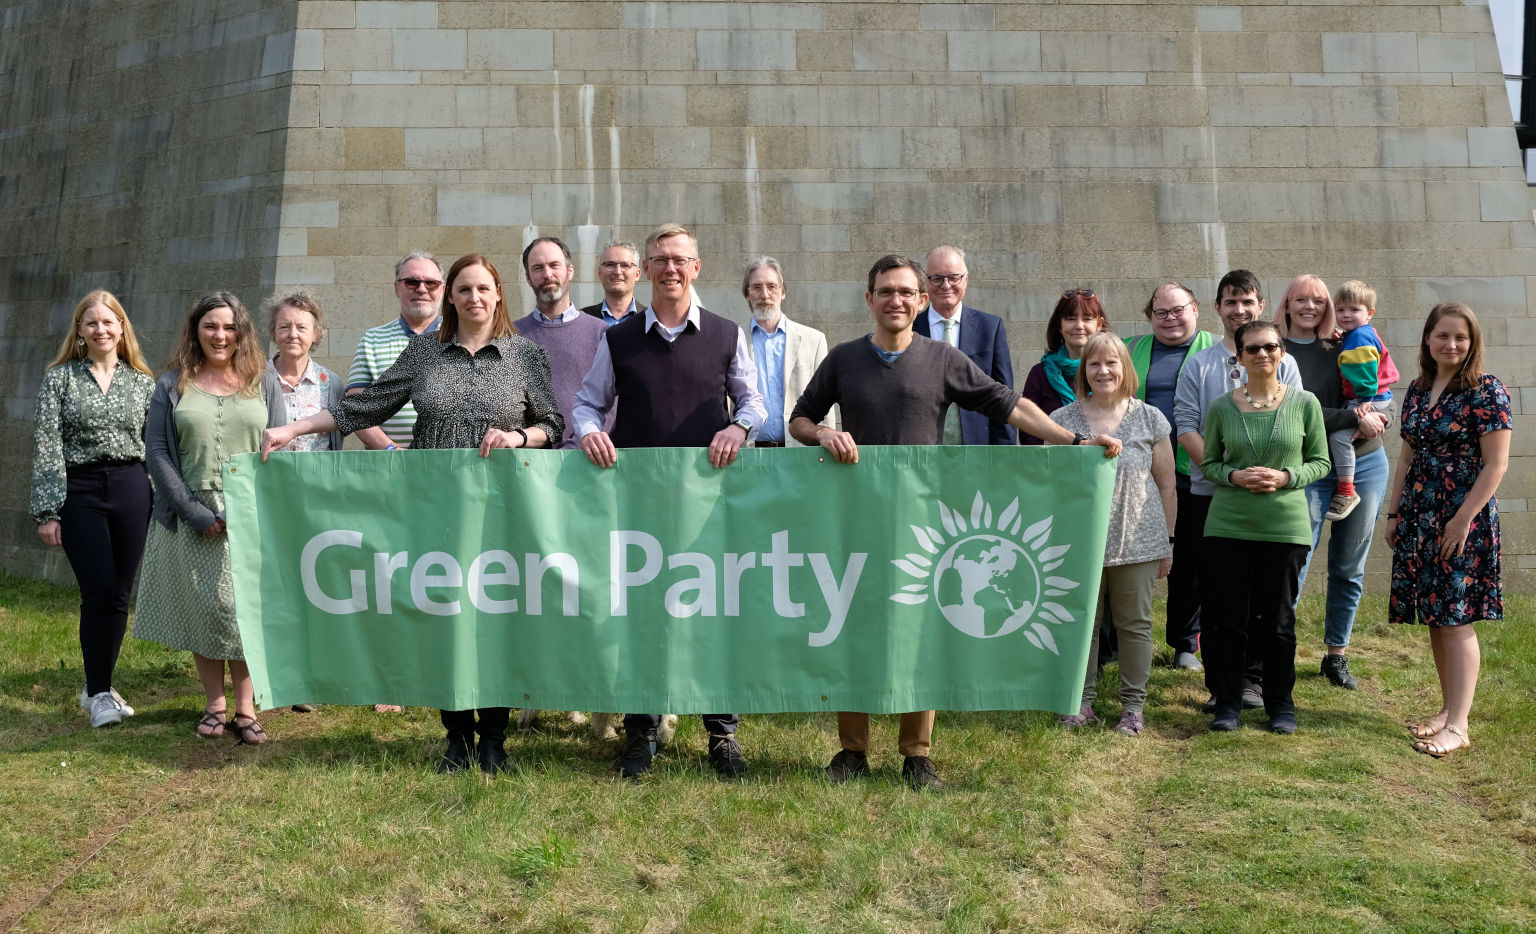 2022 Candidates with supporters and Green Party banner